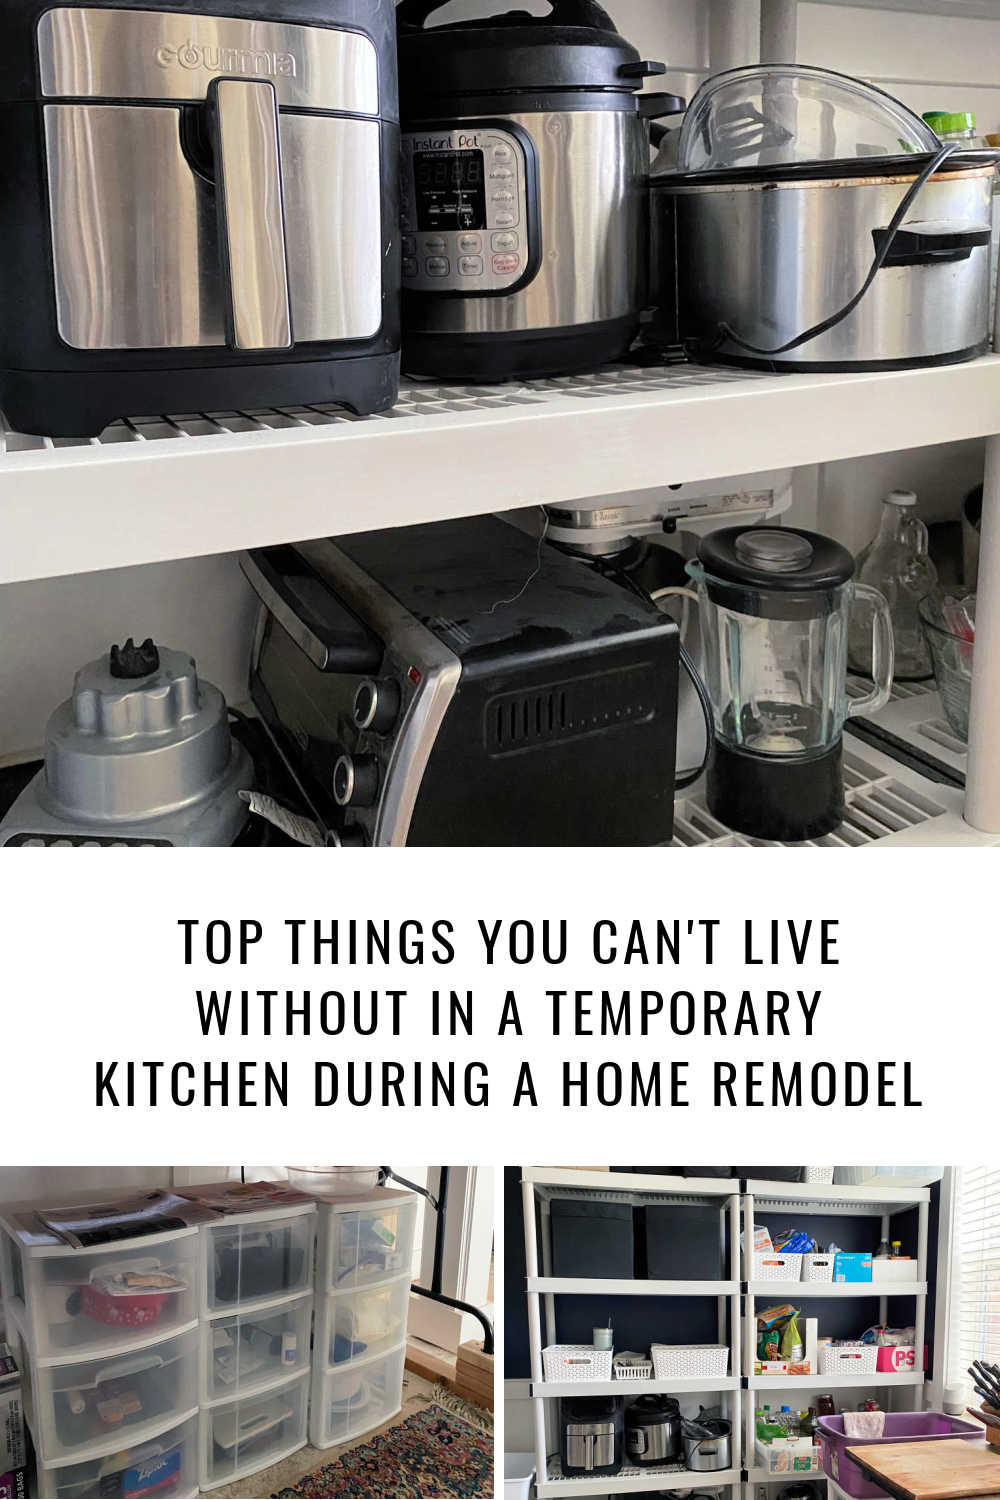 TOP THINGS YOU CAN'T LIVE WITHOUT